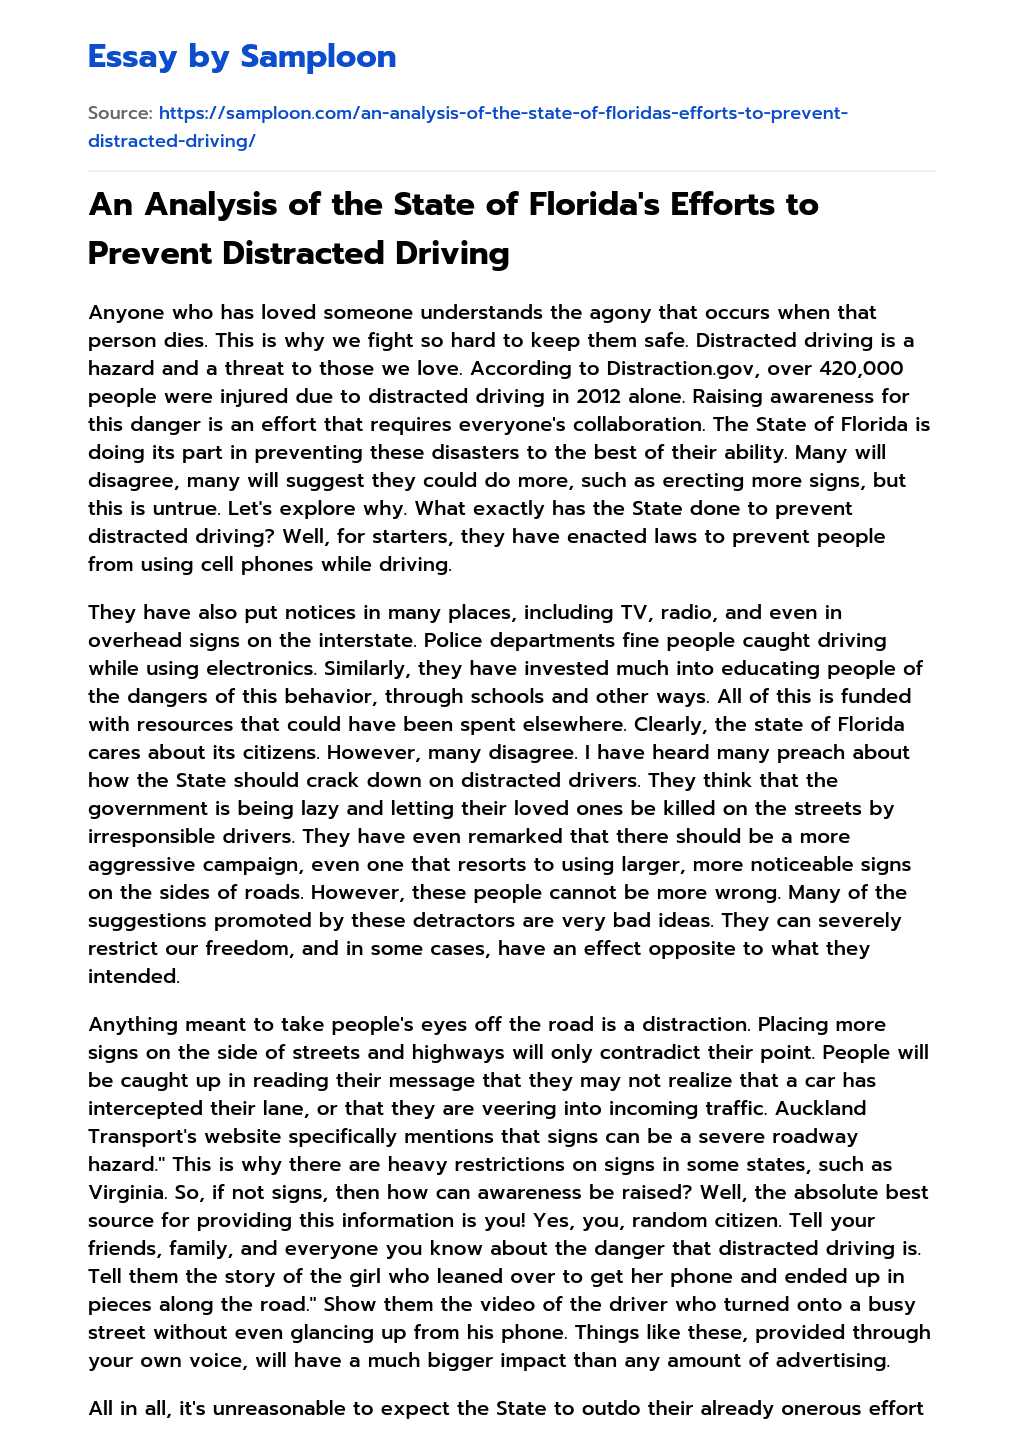 An Analysis of the State of Florida’s Efforts to Prevent Distracted Driving essay